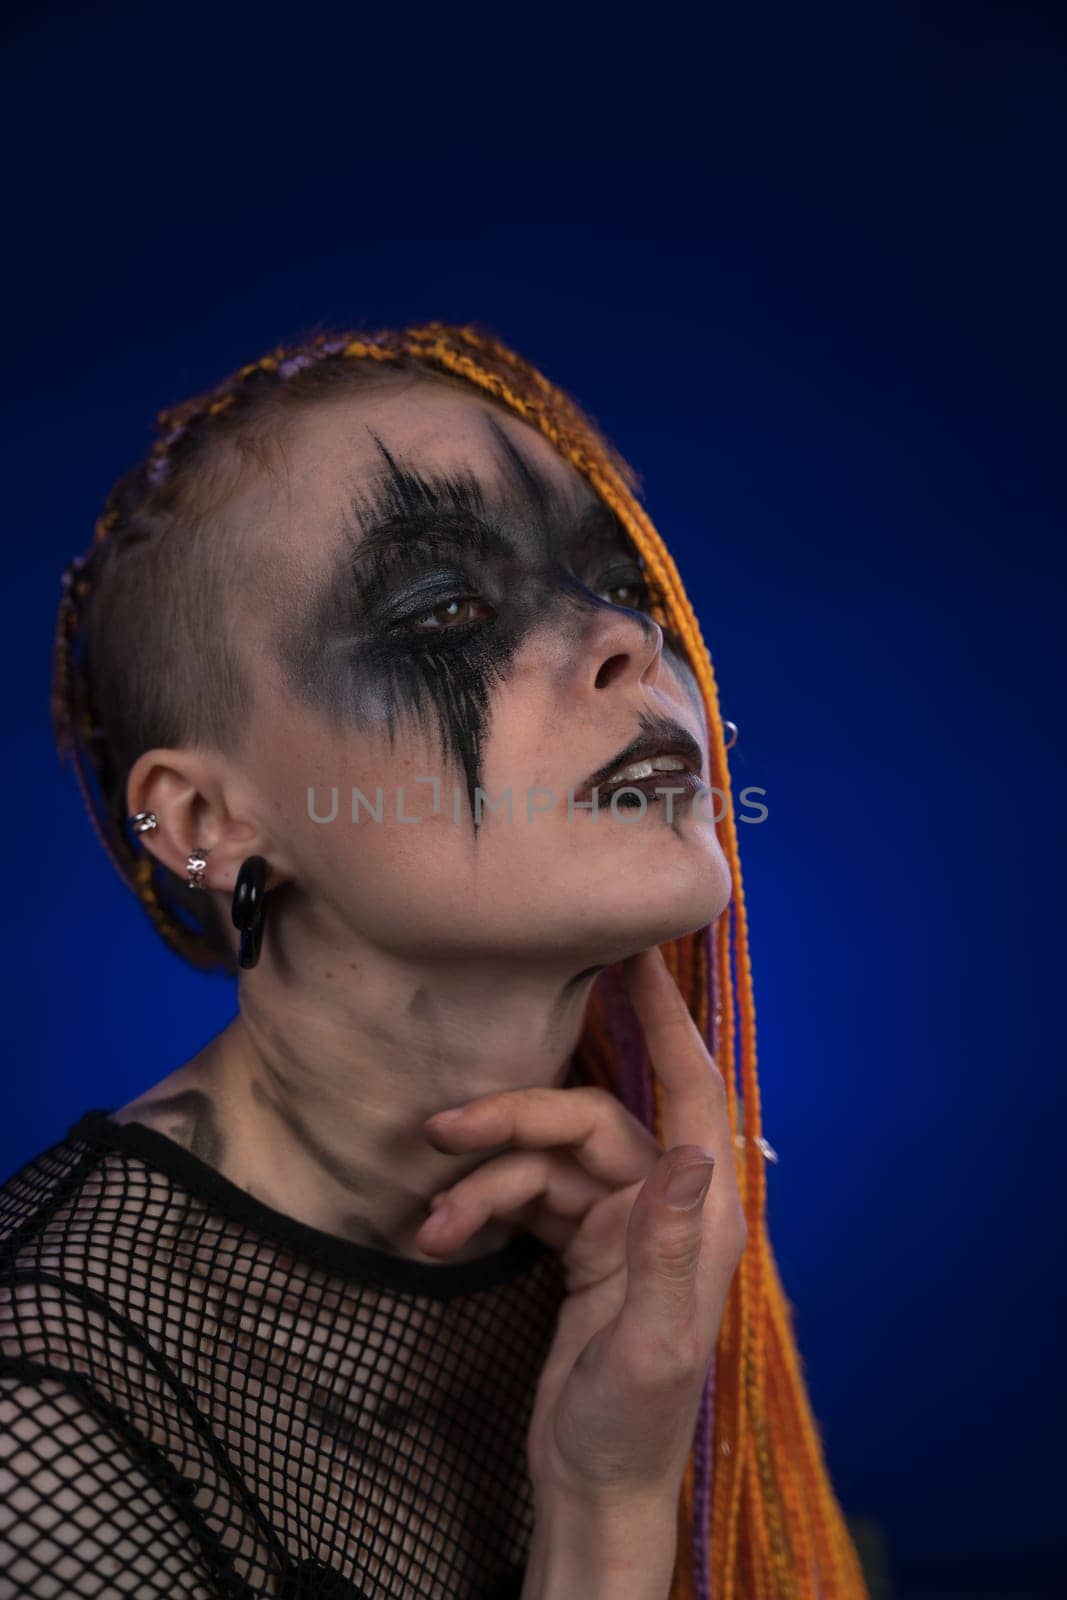 Informal woman with orange color dreadlocks hairstyle and horror black stage makeup painted on face by Alexander-Piragis